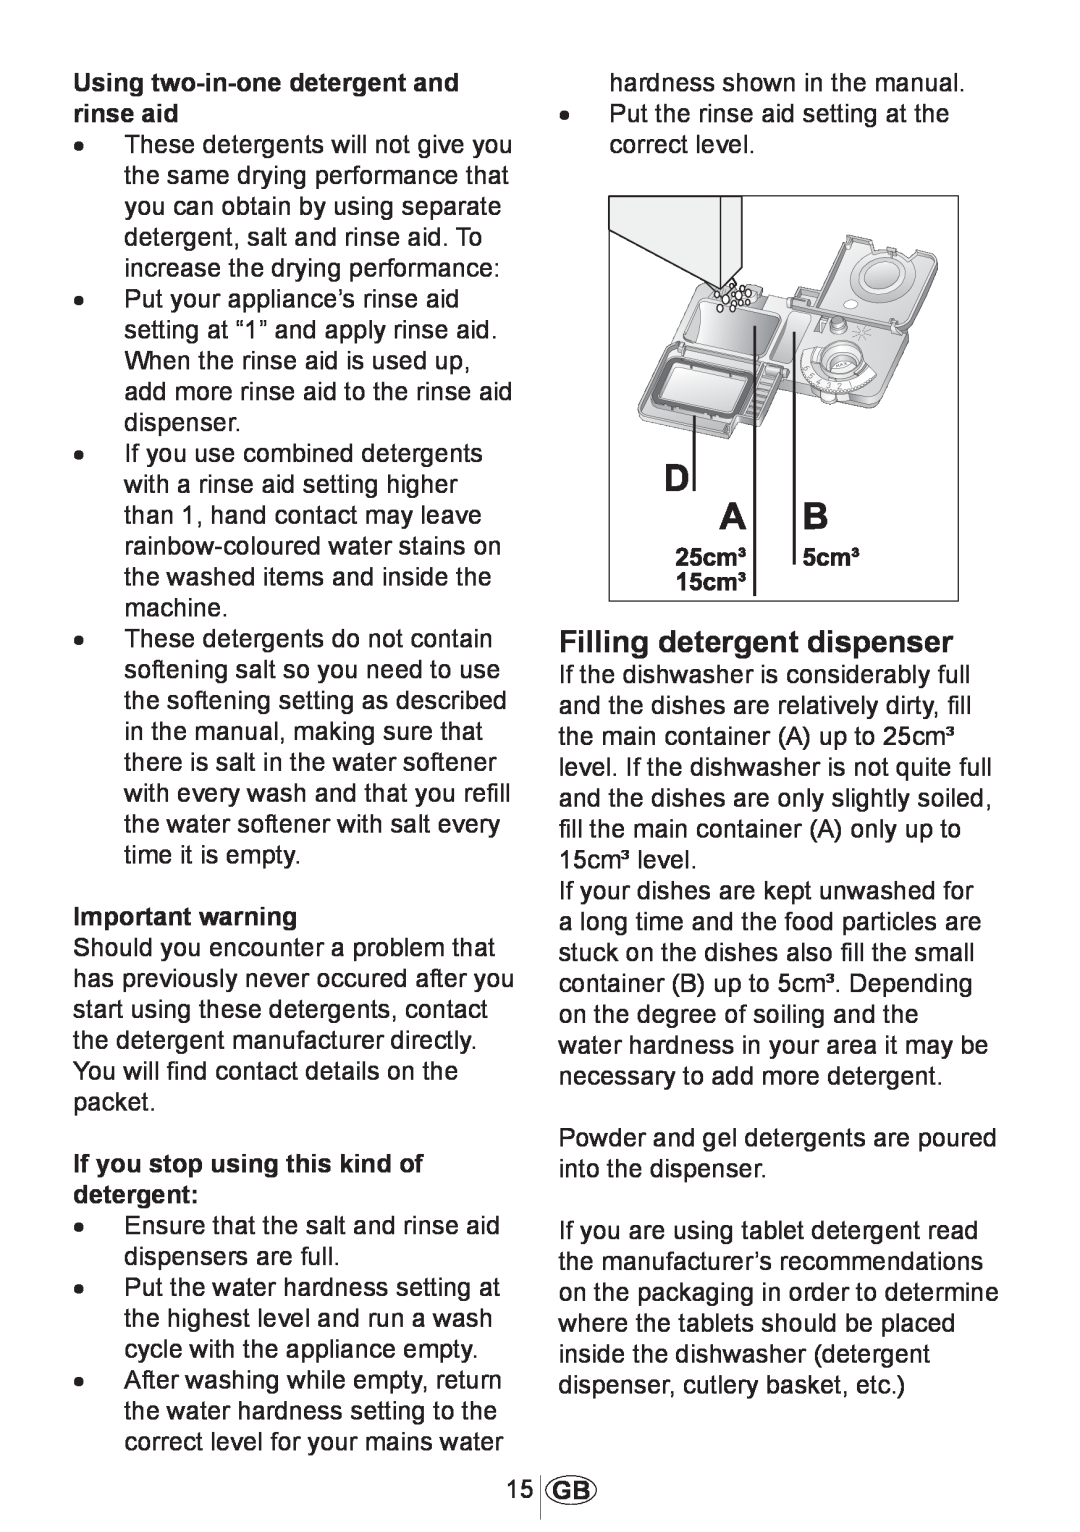 Beko DWD5414 manual Filling detergent dispenser, Using two-in-onedetergent and rinse aid, Important warning 